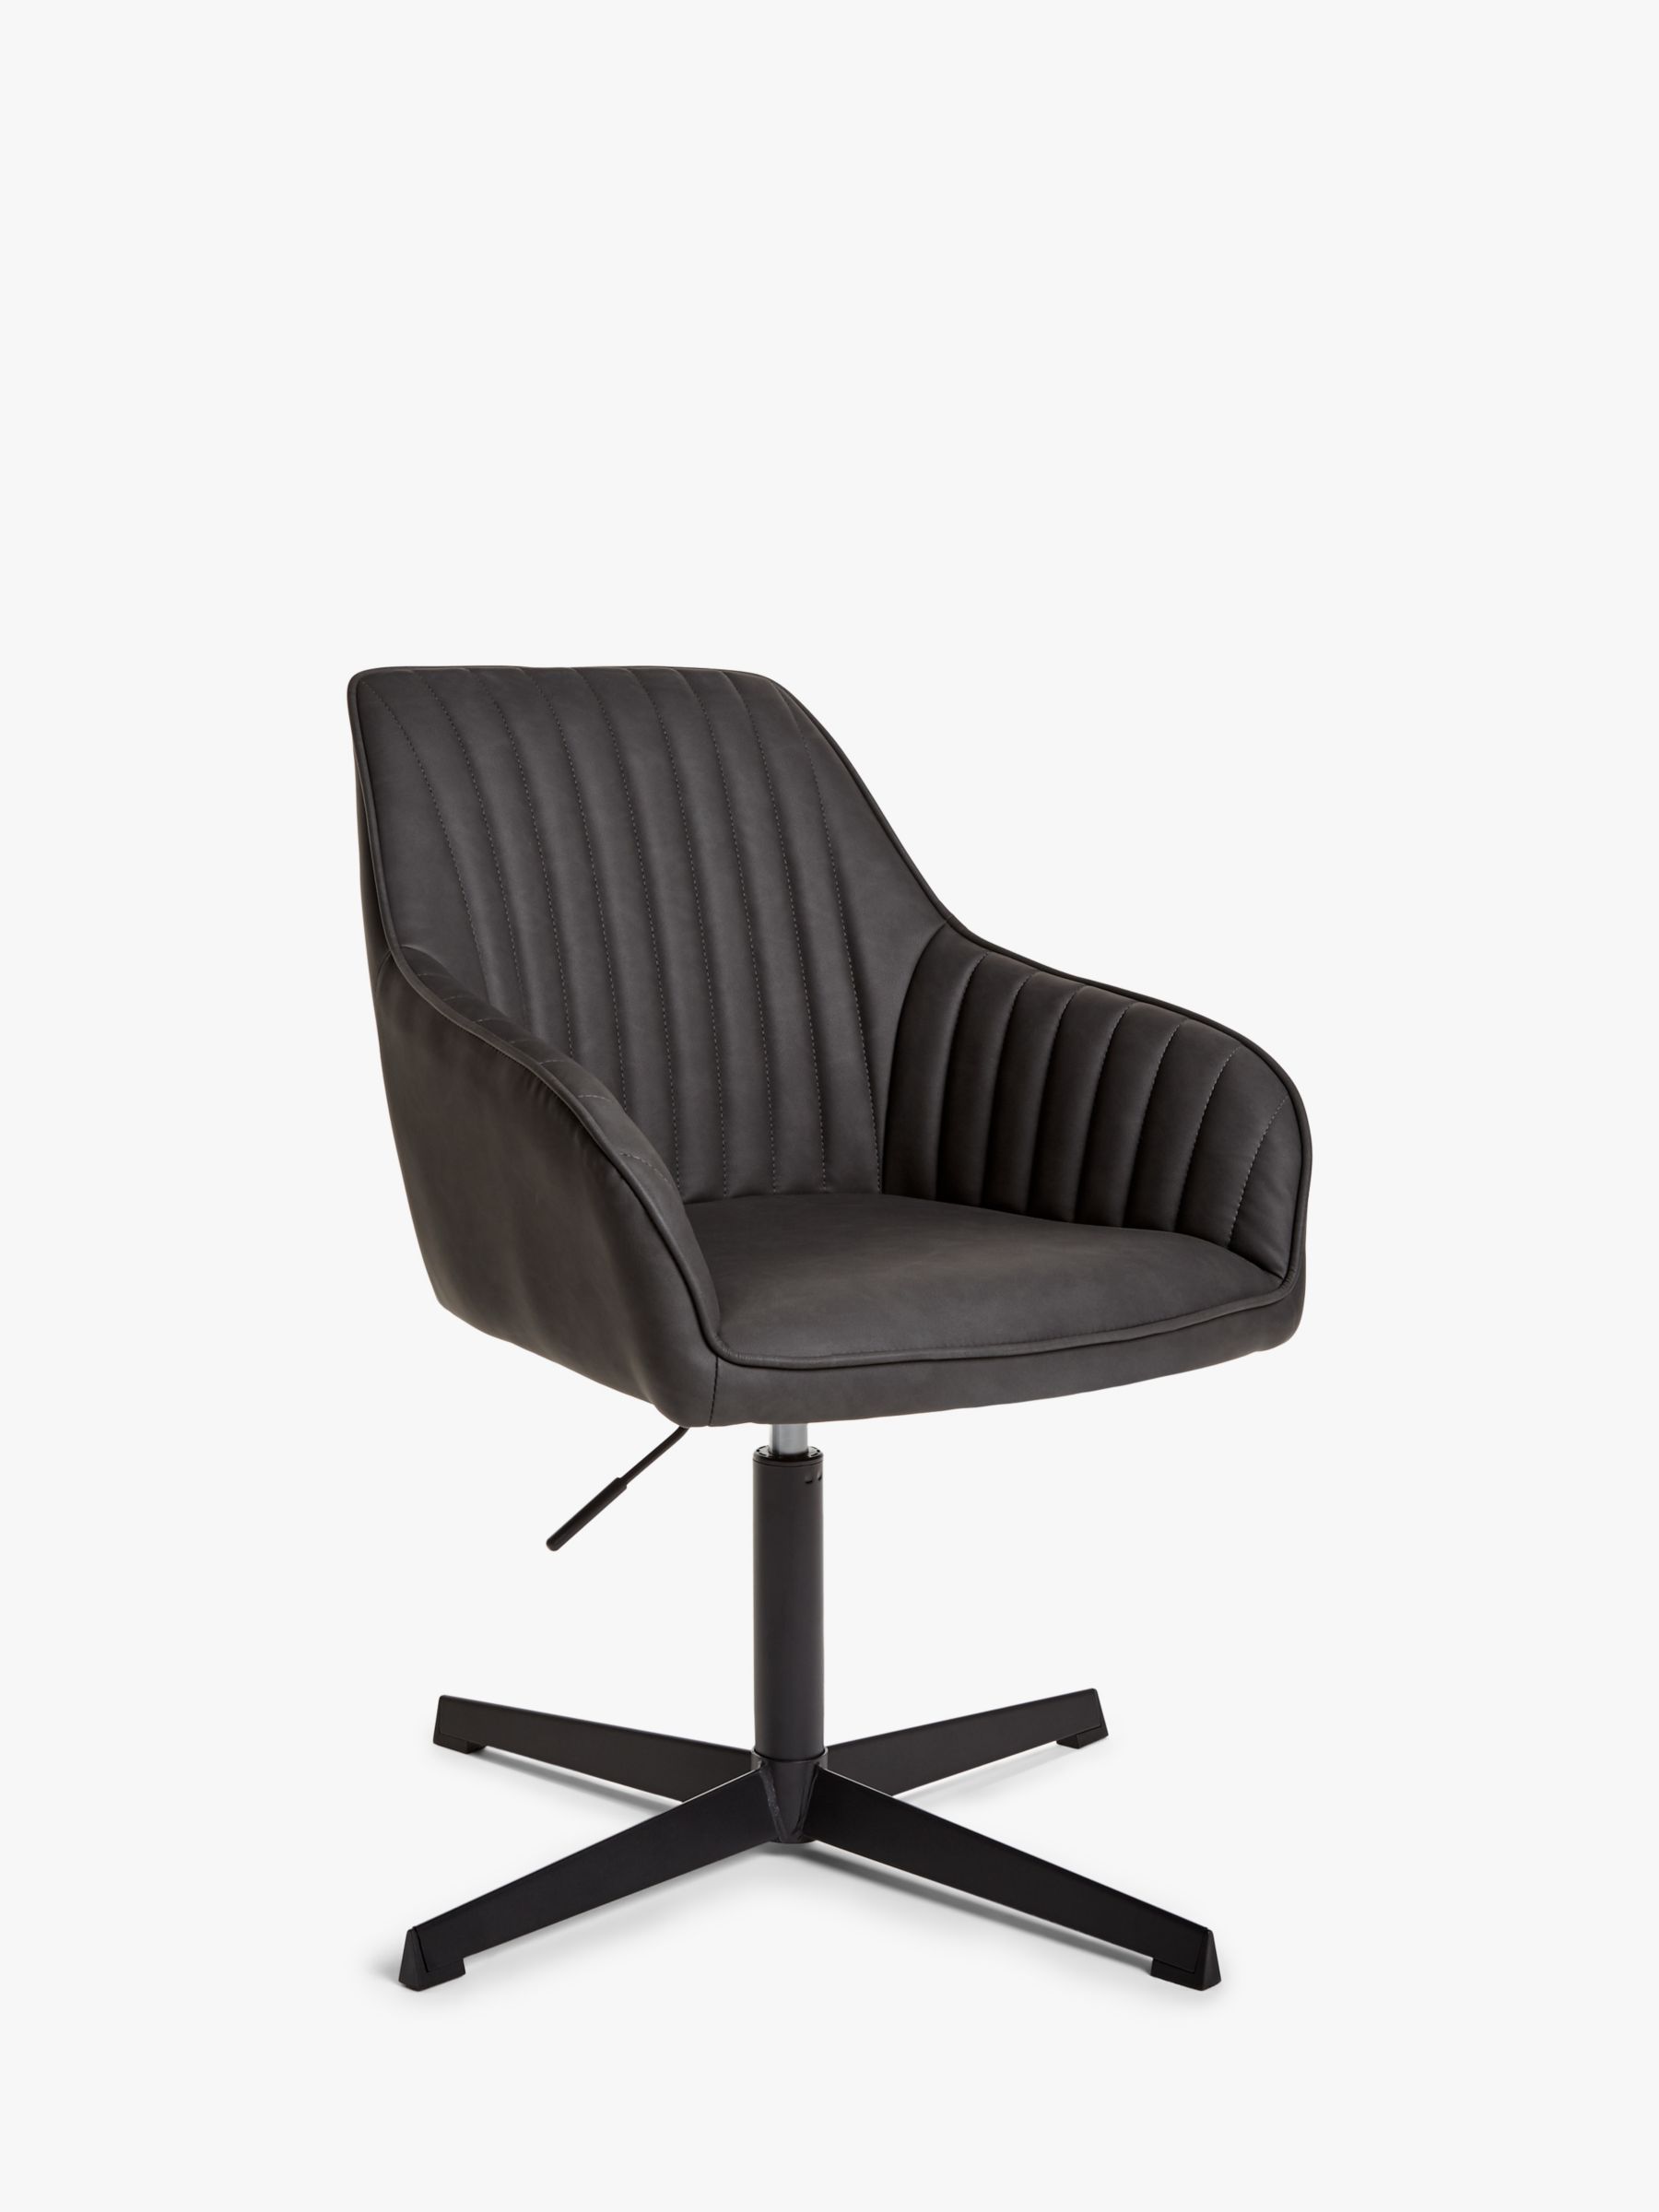 Photo of John lewis brooks office chair charcoal